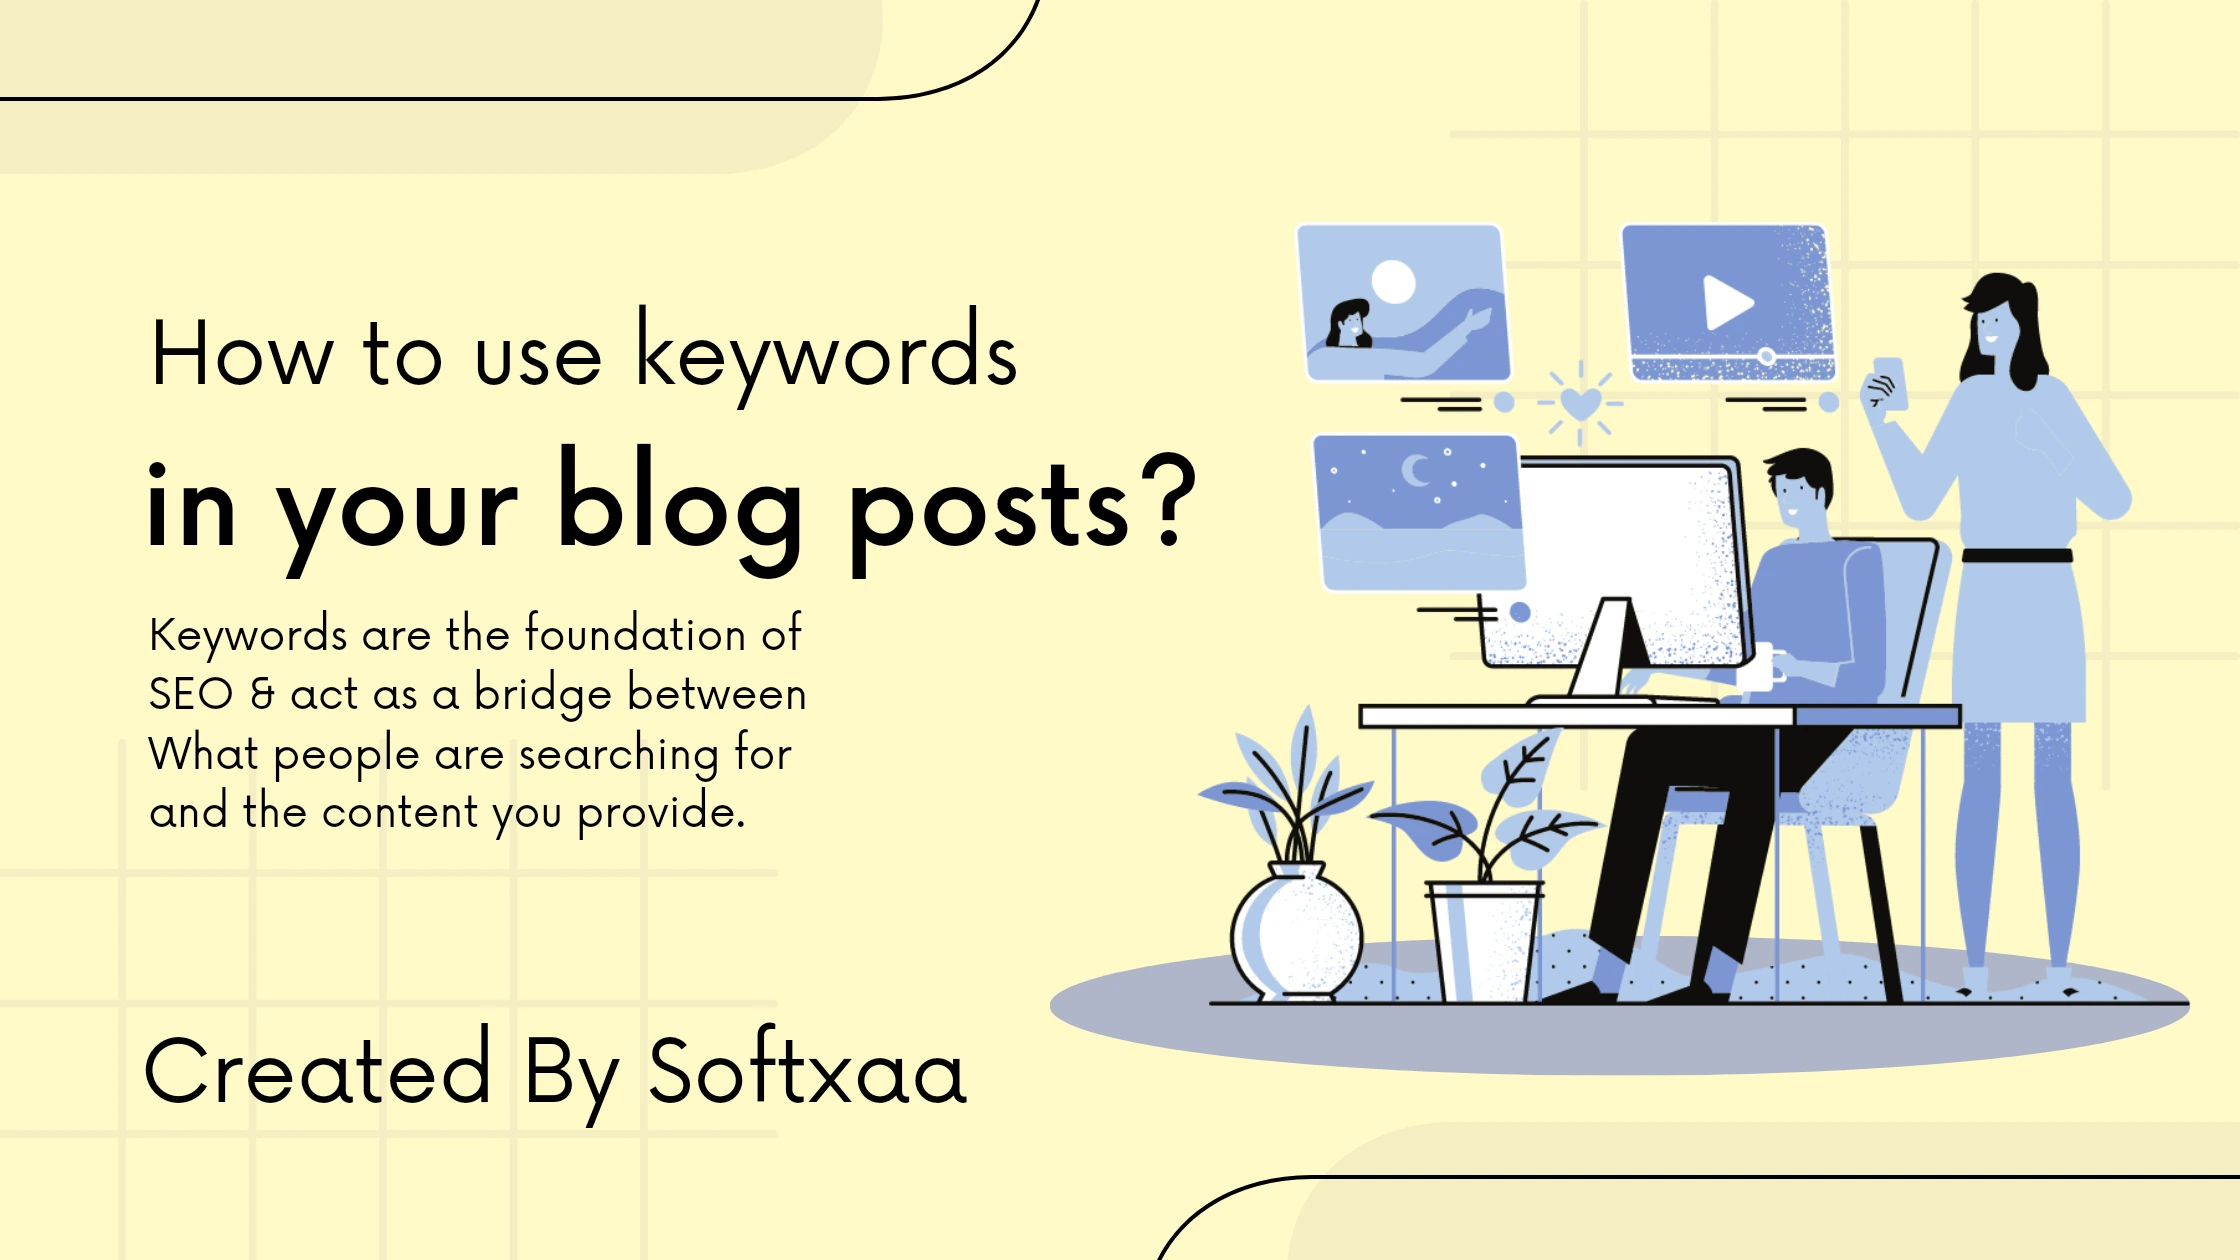 How to Use Keywords in Your Blog Posts